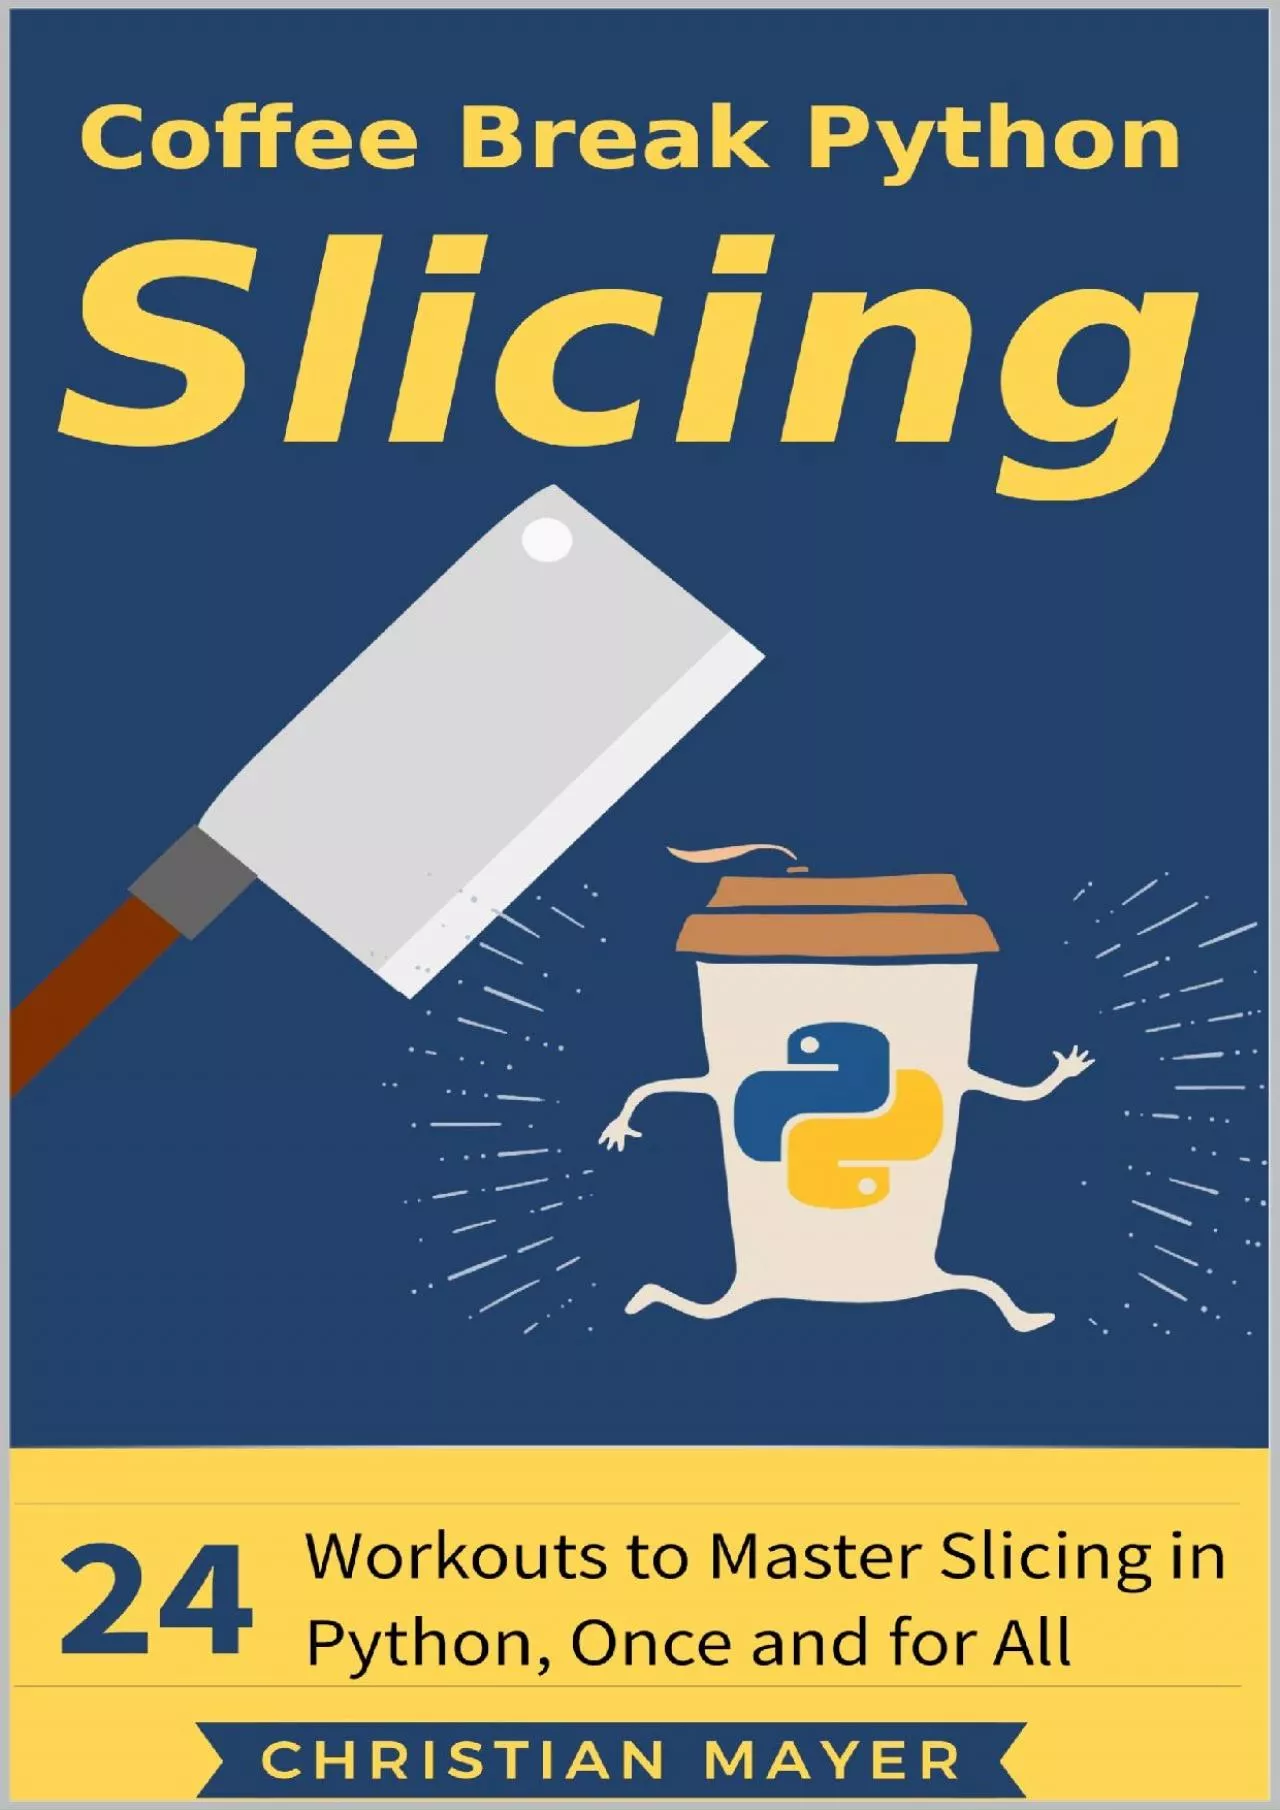 [DOWLOAD]-Coffee Break Python Slicing: 24 Workouts to Master Slicing in Python, Once and